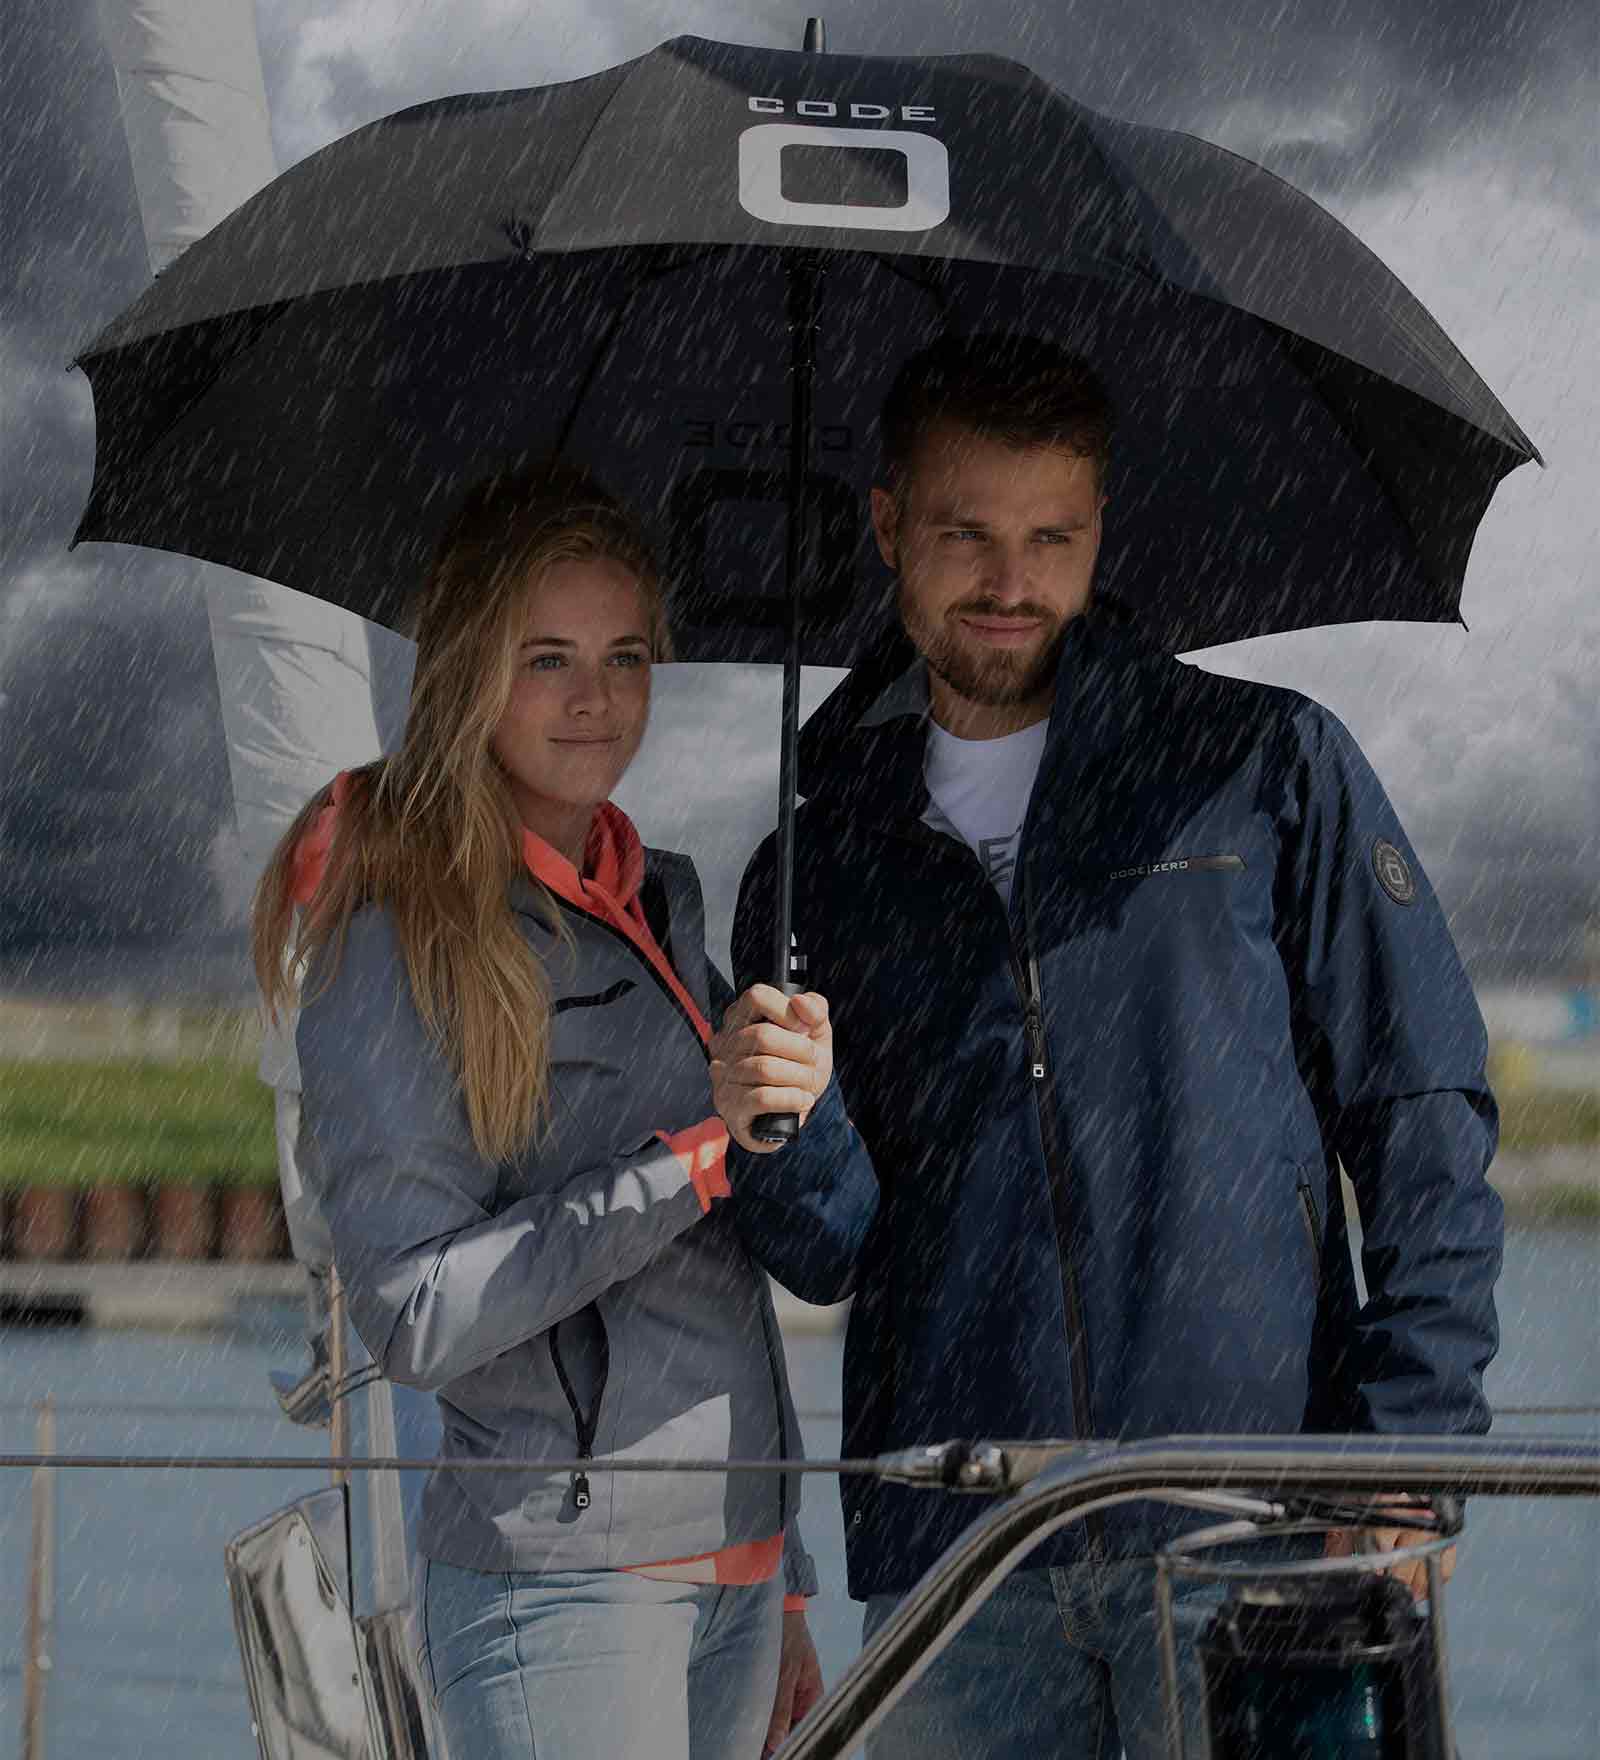 Two people under an umbrella